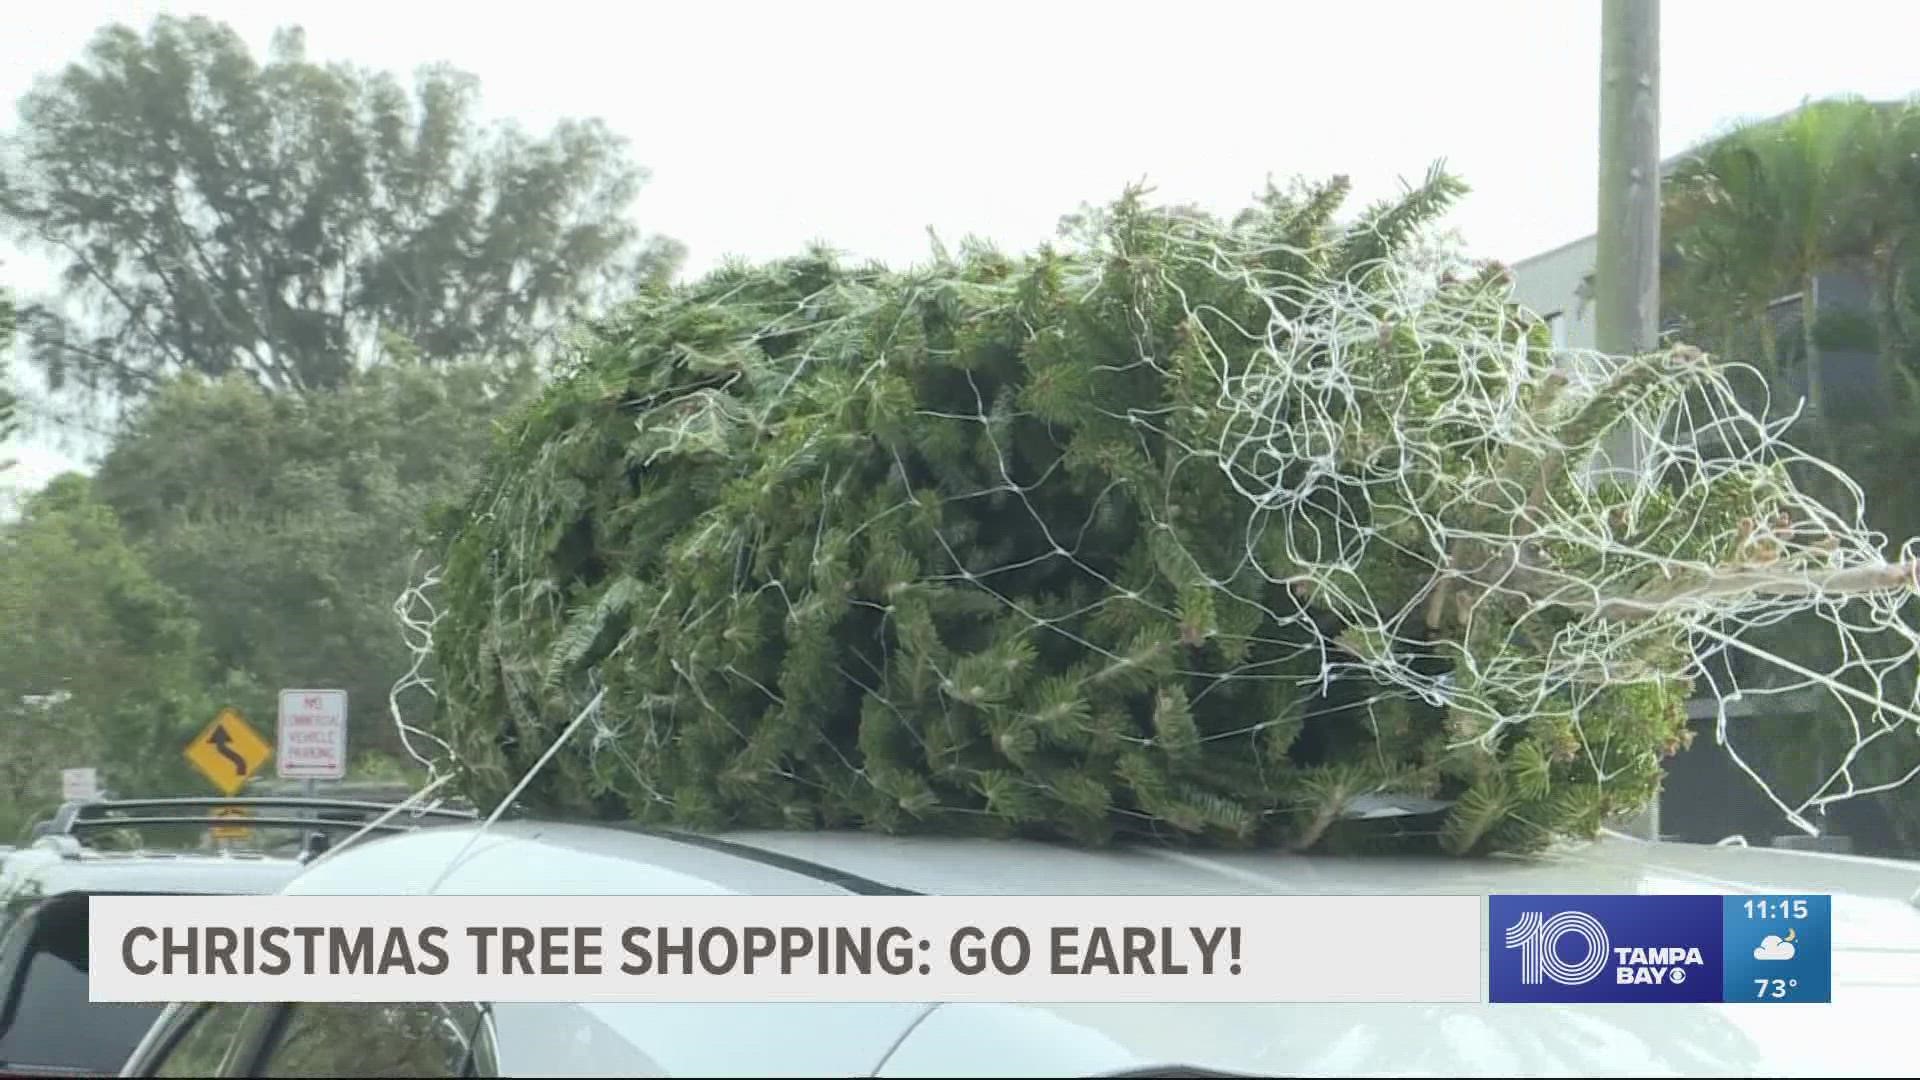 Welcome to Christmas time! If you're buying a live tree, the recommendation is to shop early.